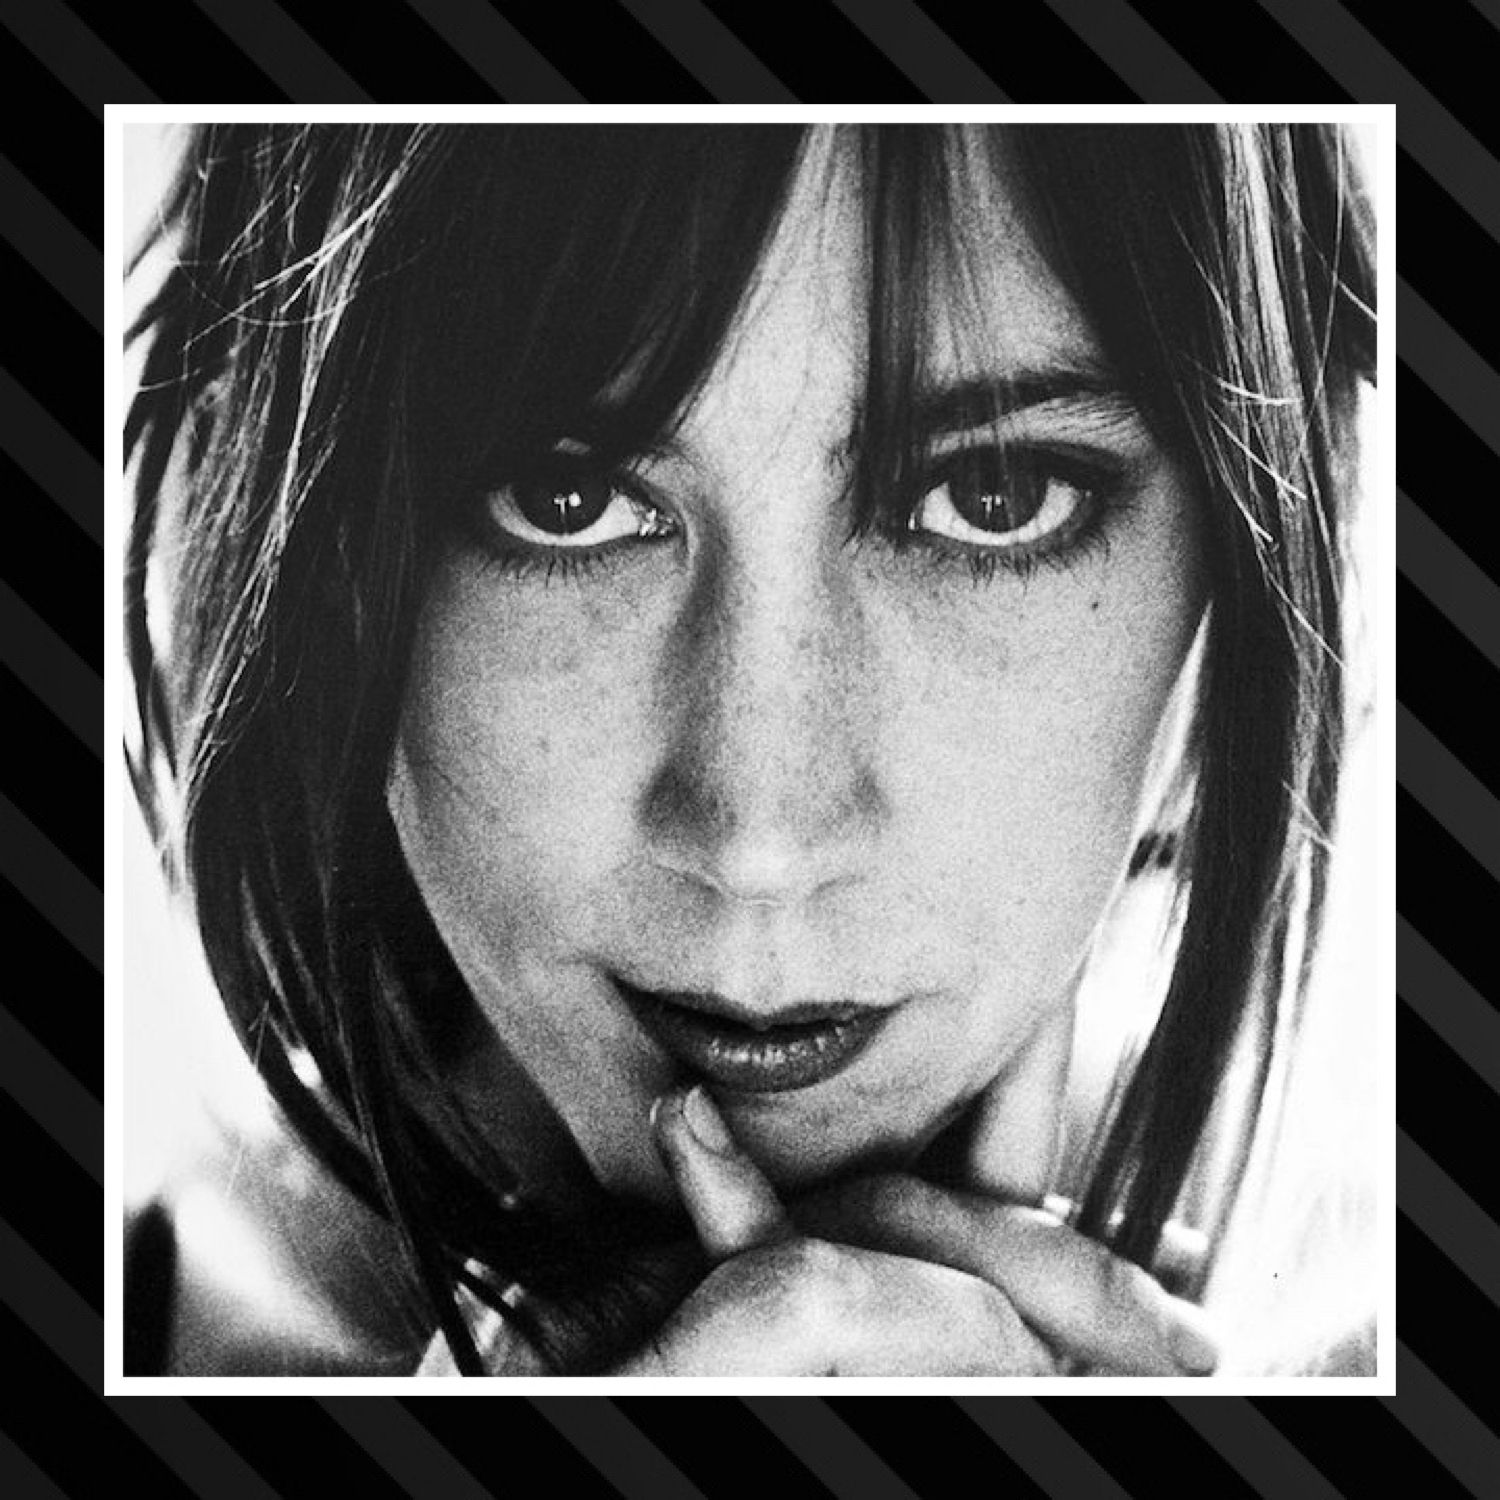 2: The one with Beth Orton Image